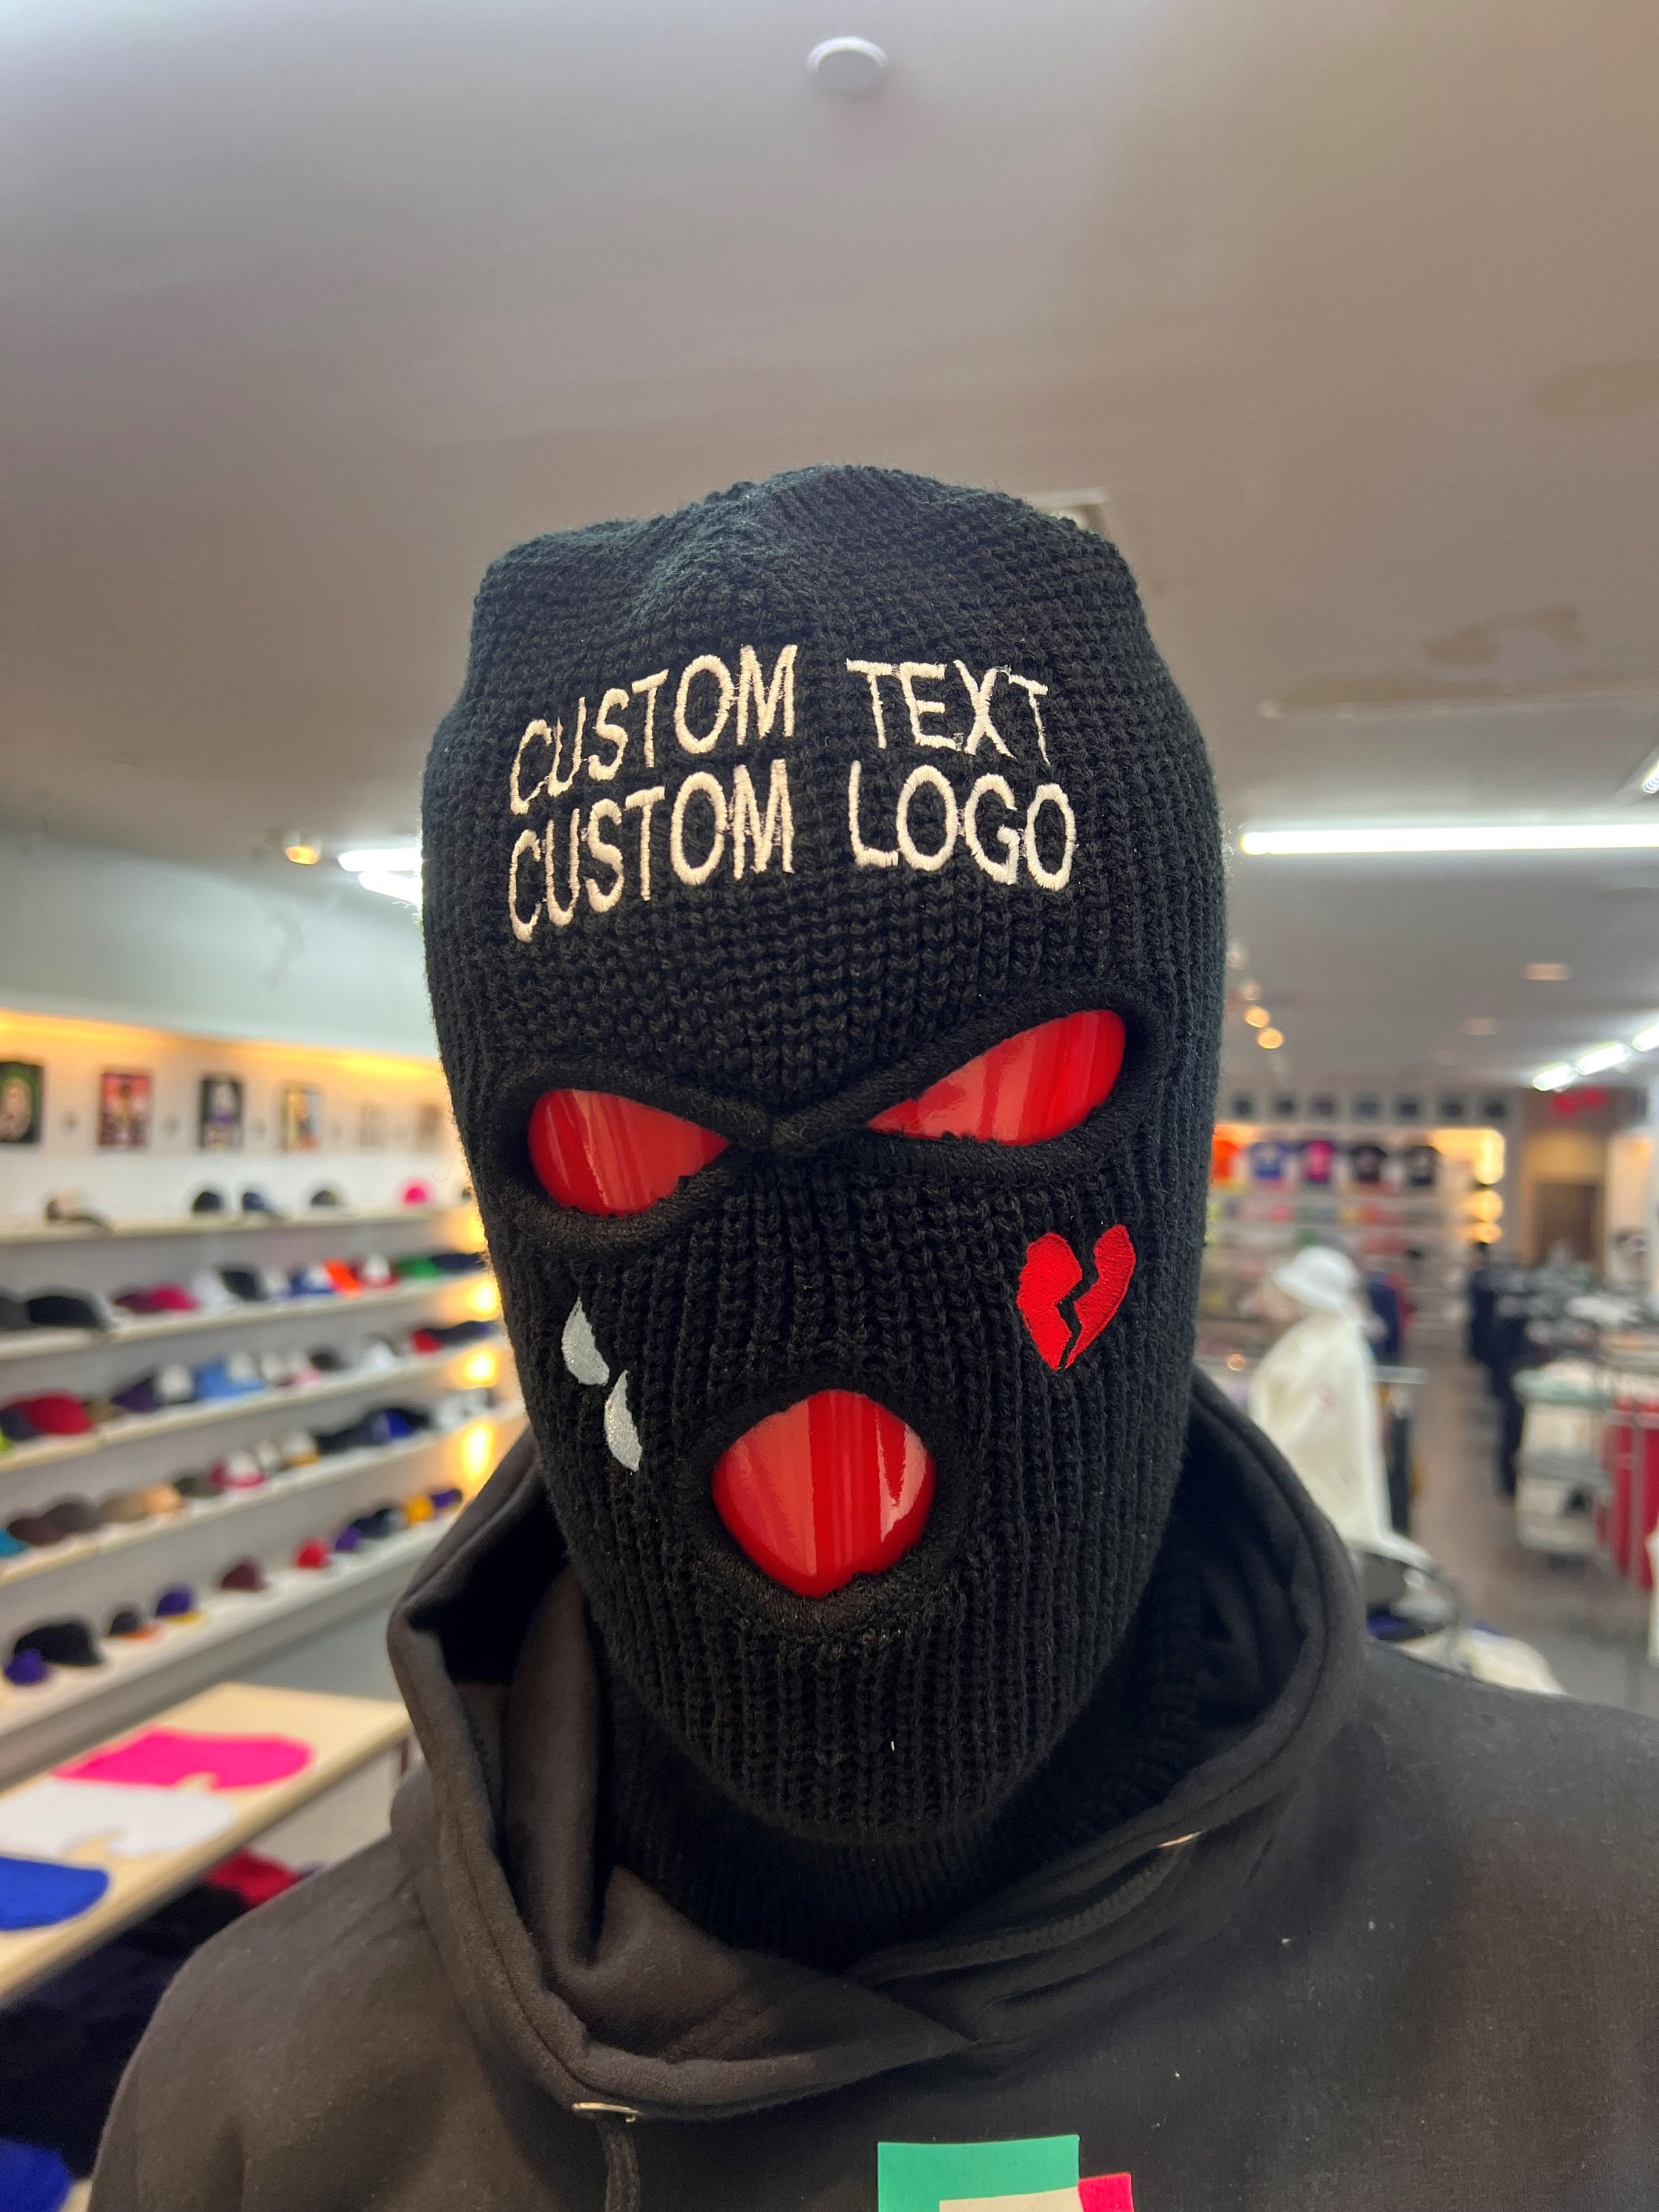 Customize Ski Mask-personalize Your 3 Hole Ski Face Mask With Text